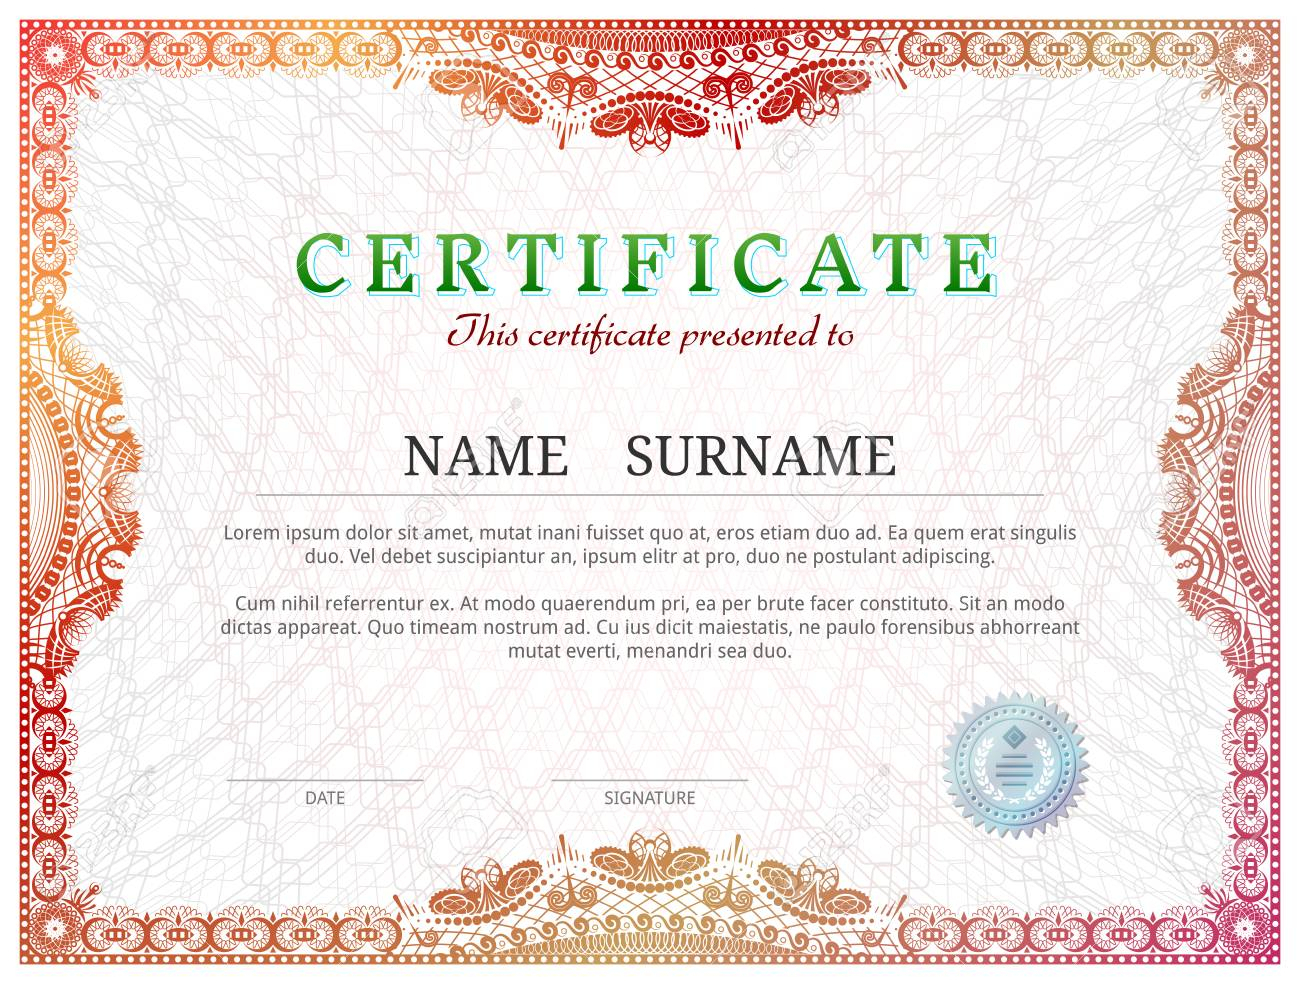 Certificate Template With Guilloche Elements. Red Diploma Border.. For Validation Certificate Template